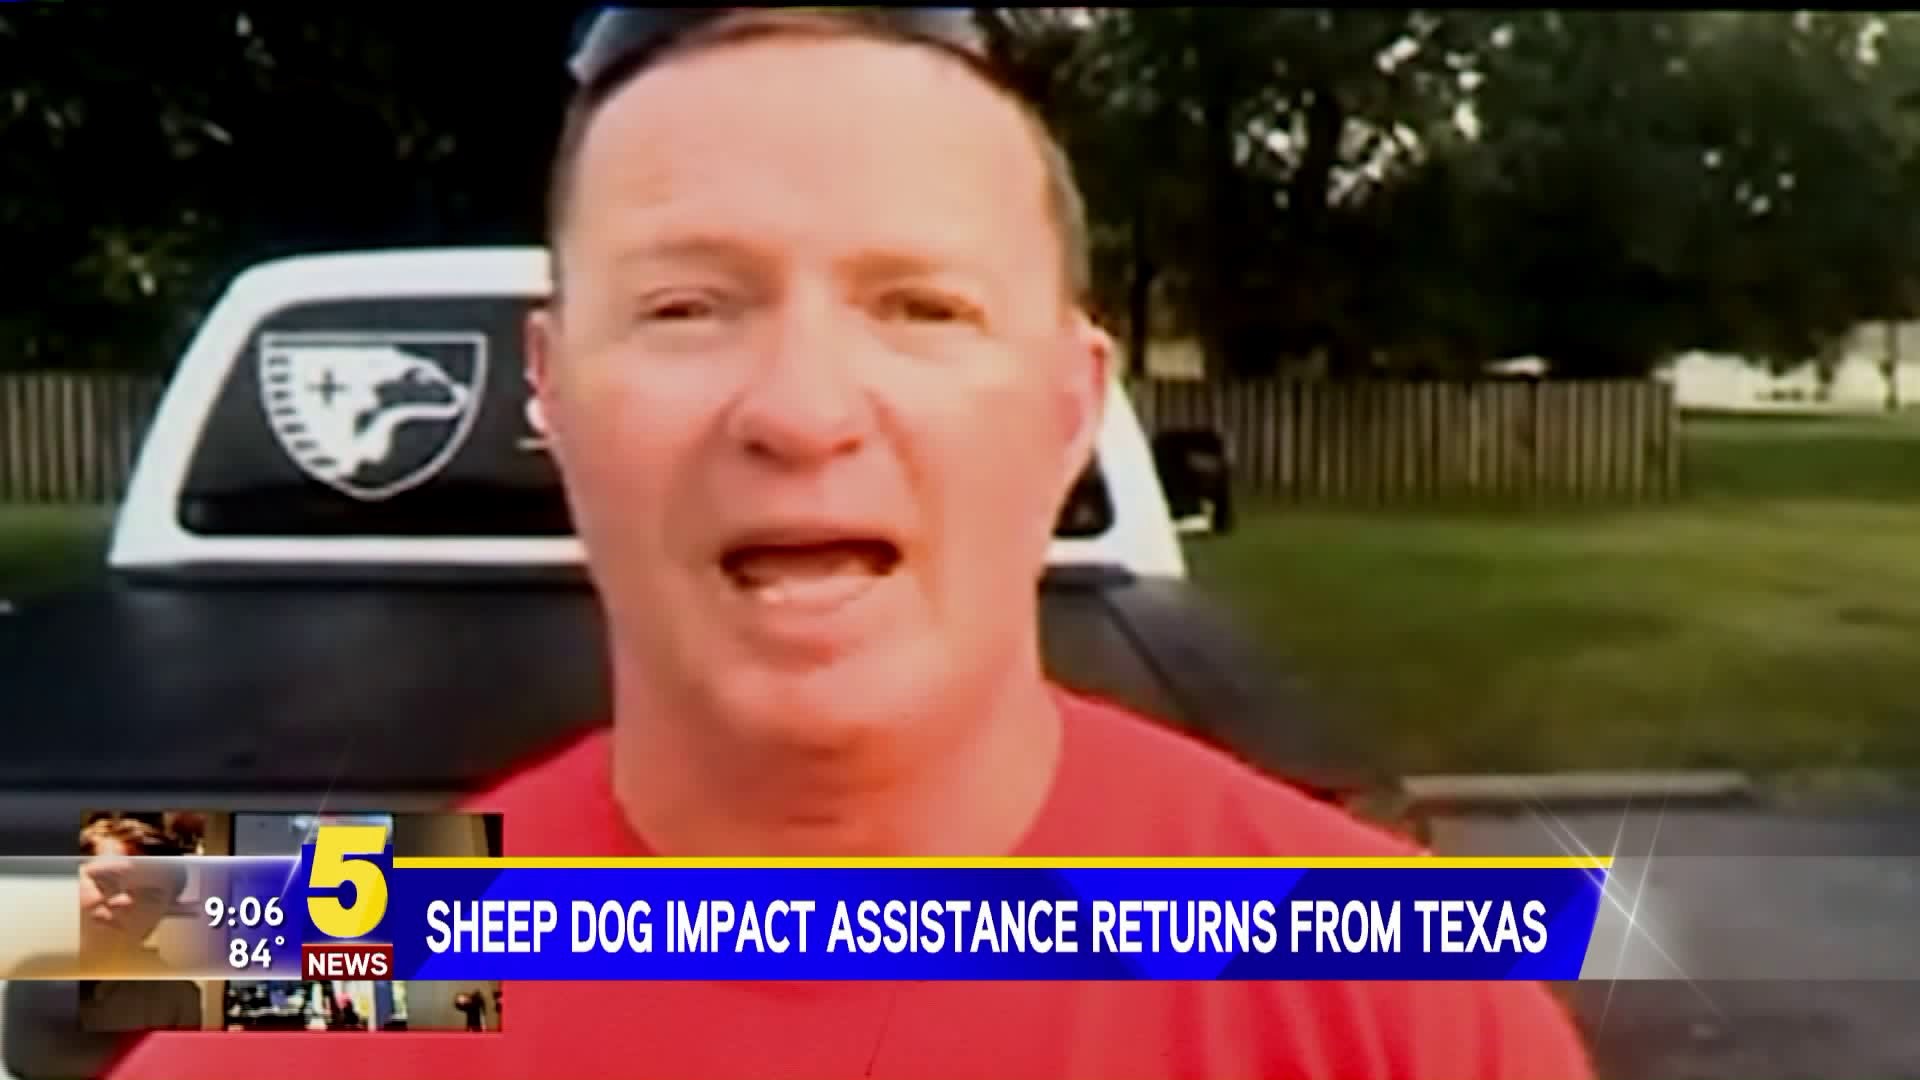 Sheep Dog Impact Assistance Returns From Texas